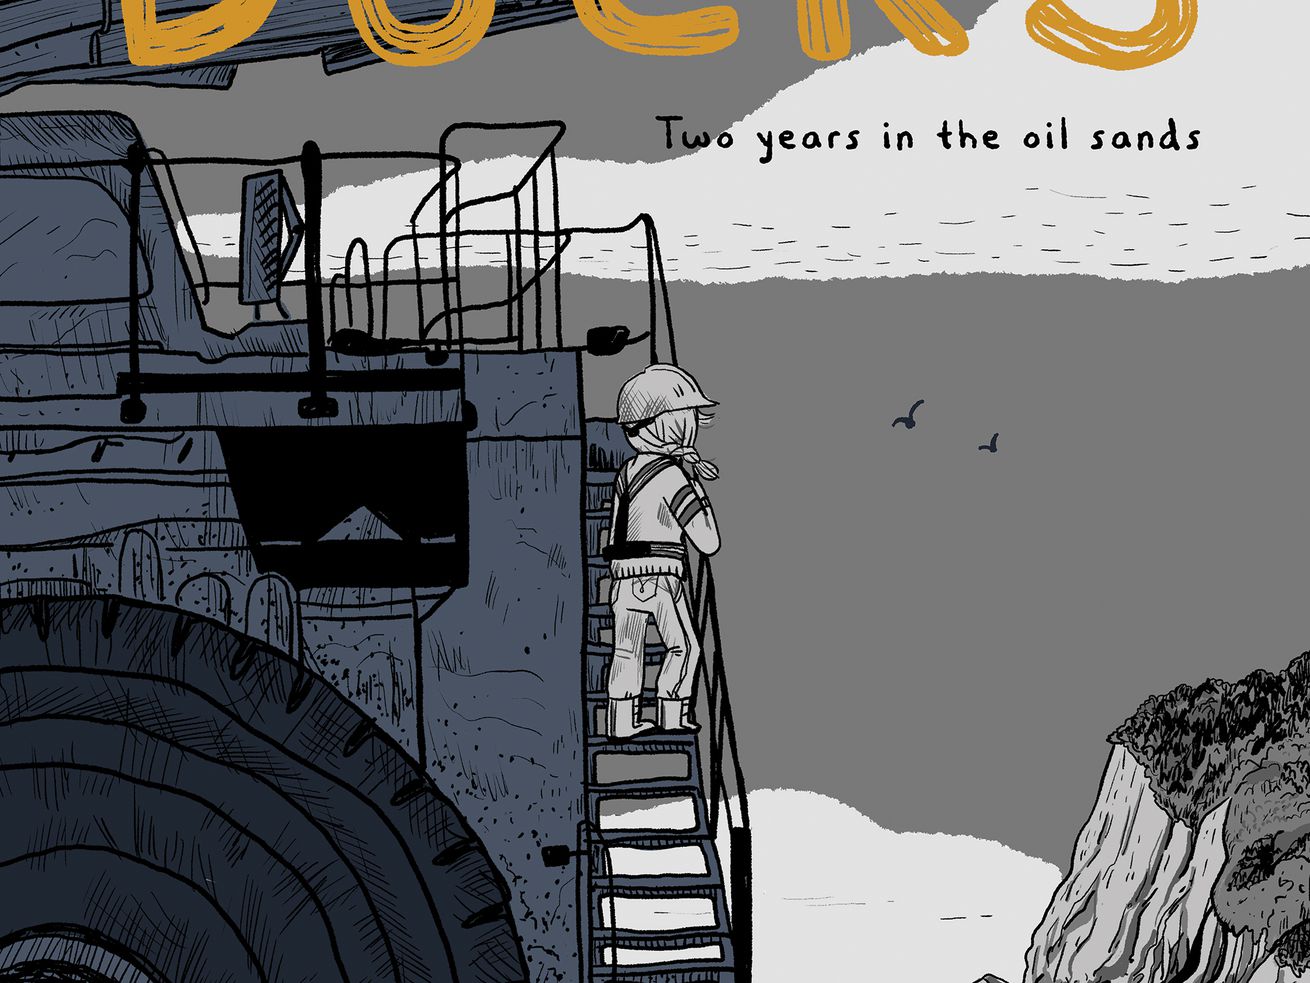 In Ducks, Kate Beaton of Hark! A Vagrant goes bleak and desolate